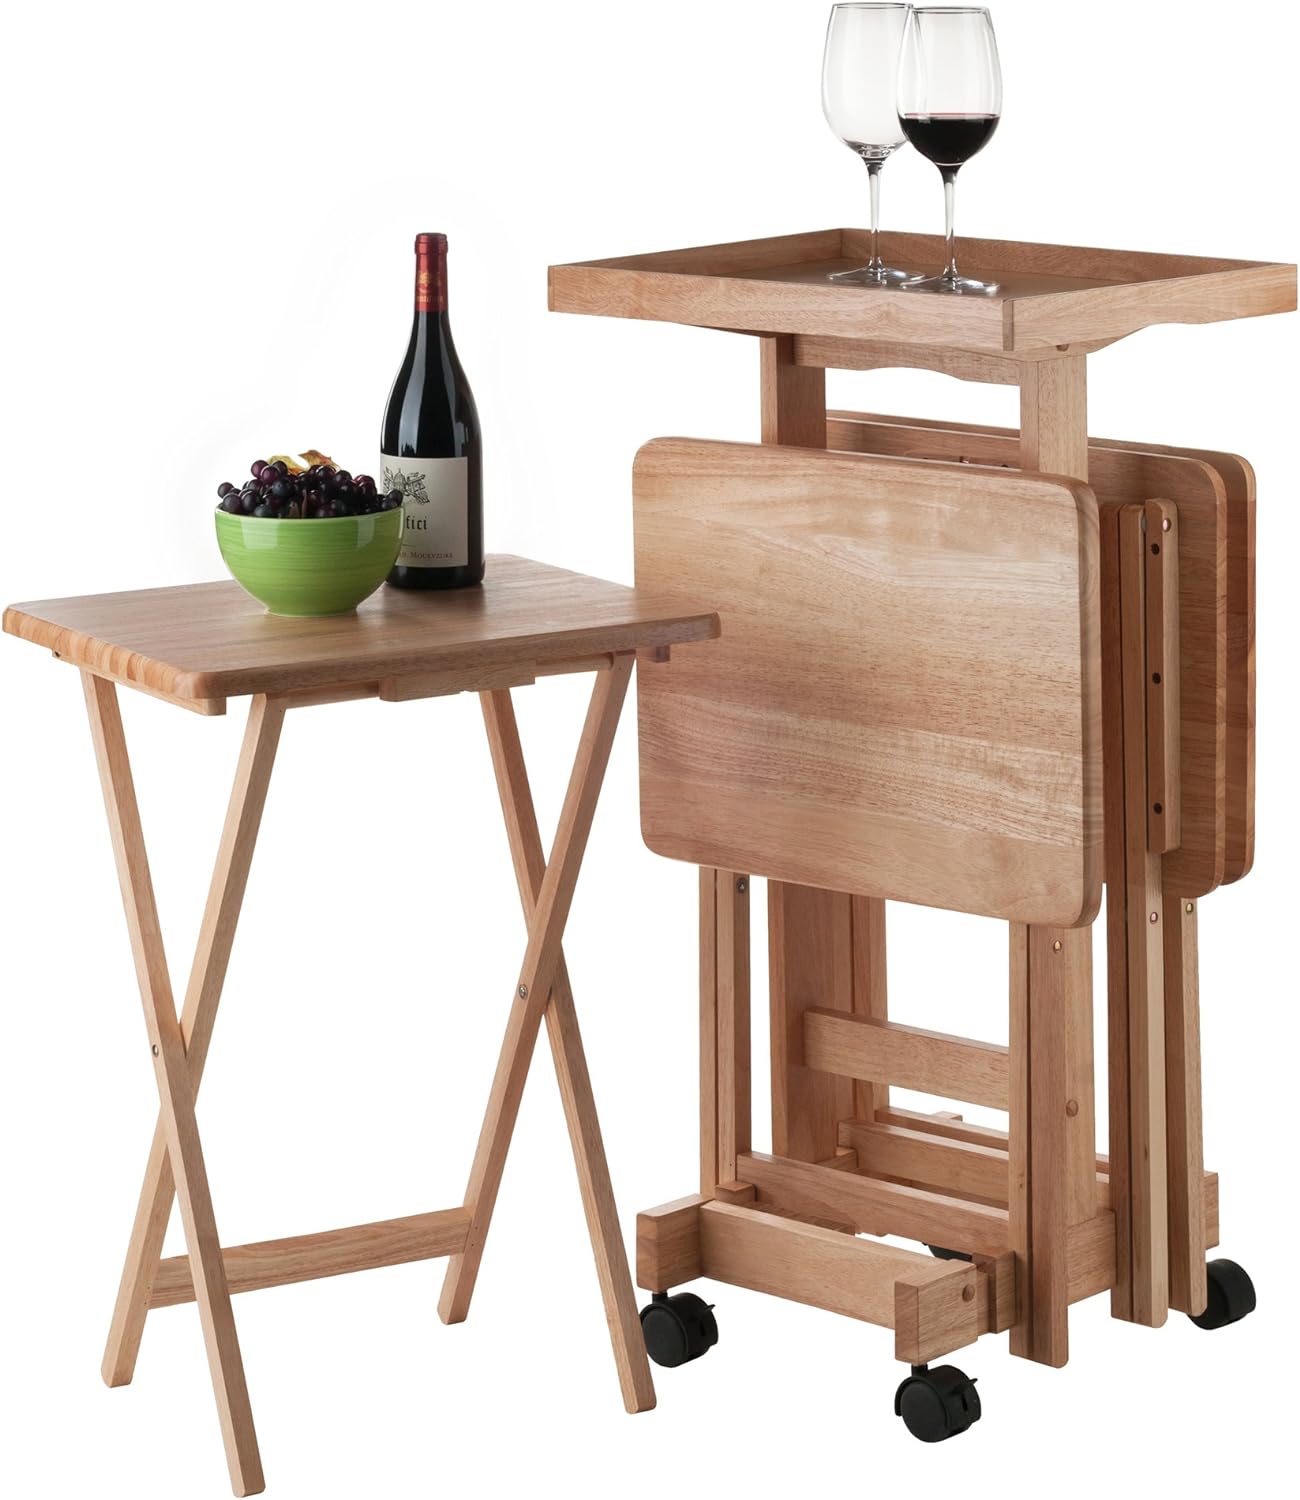 Winsome 6-Piece Snack Table, Natural (42820)